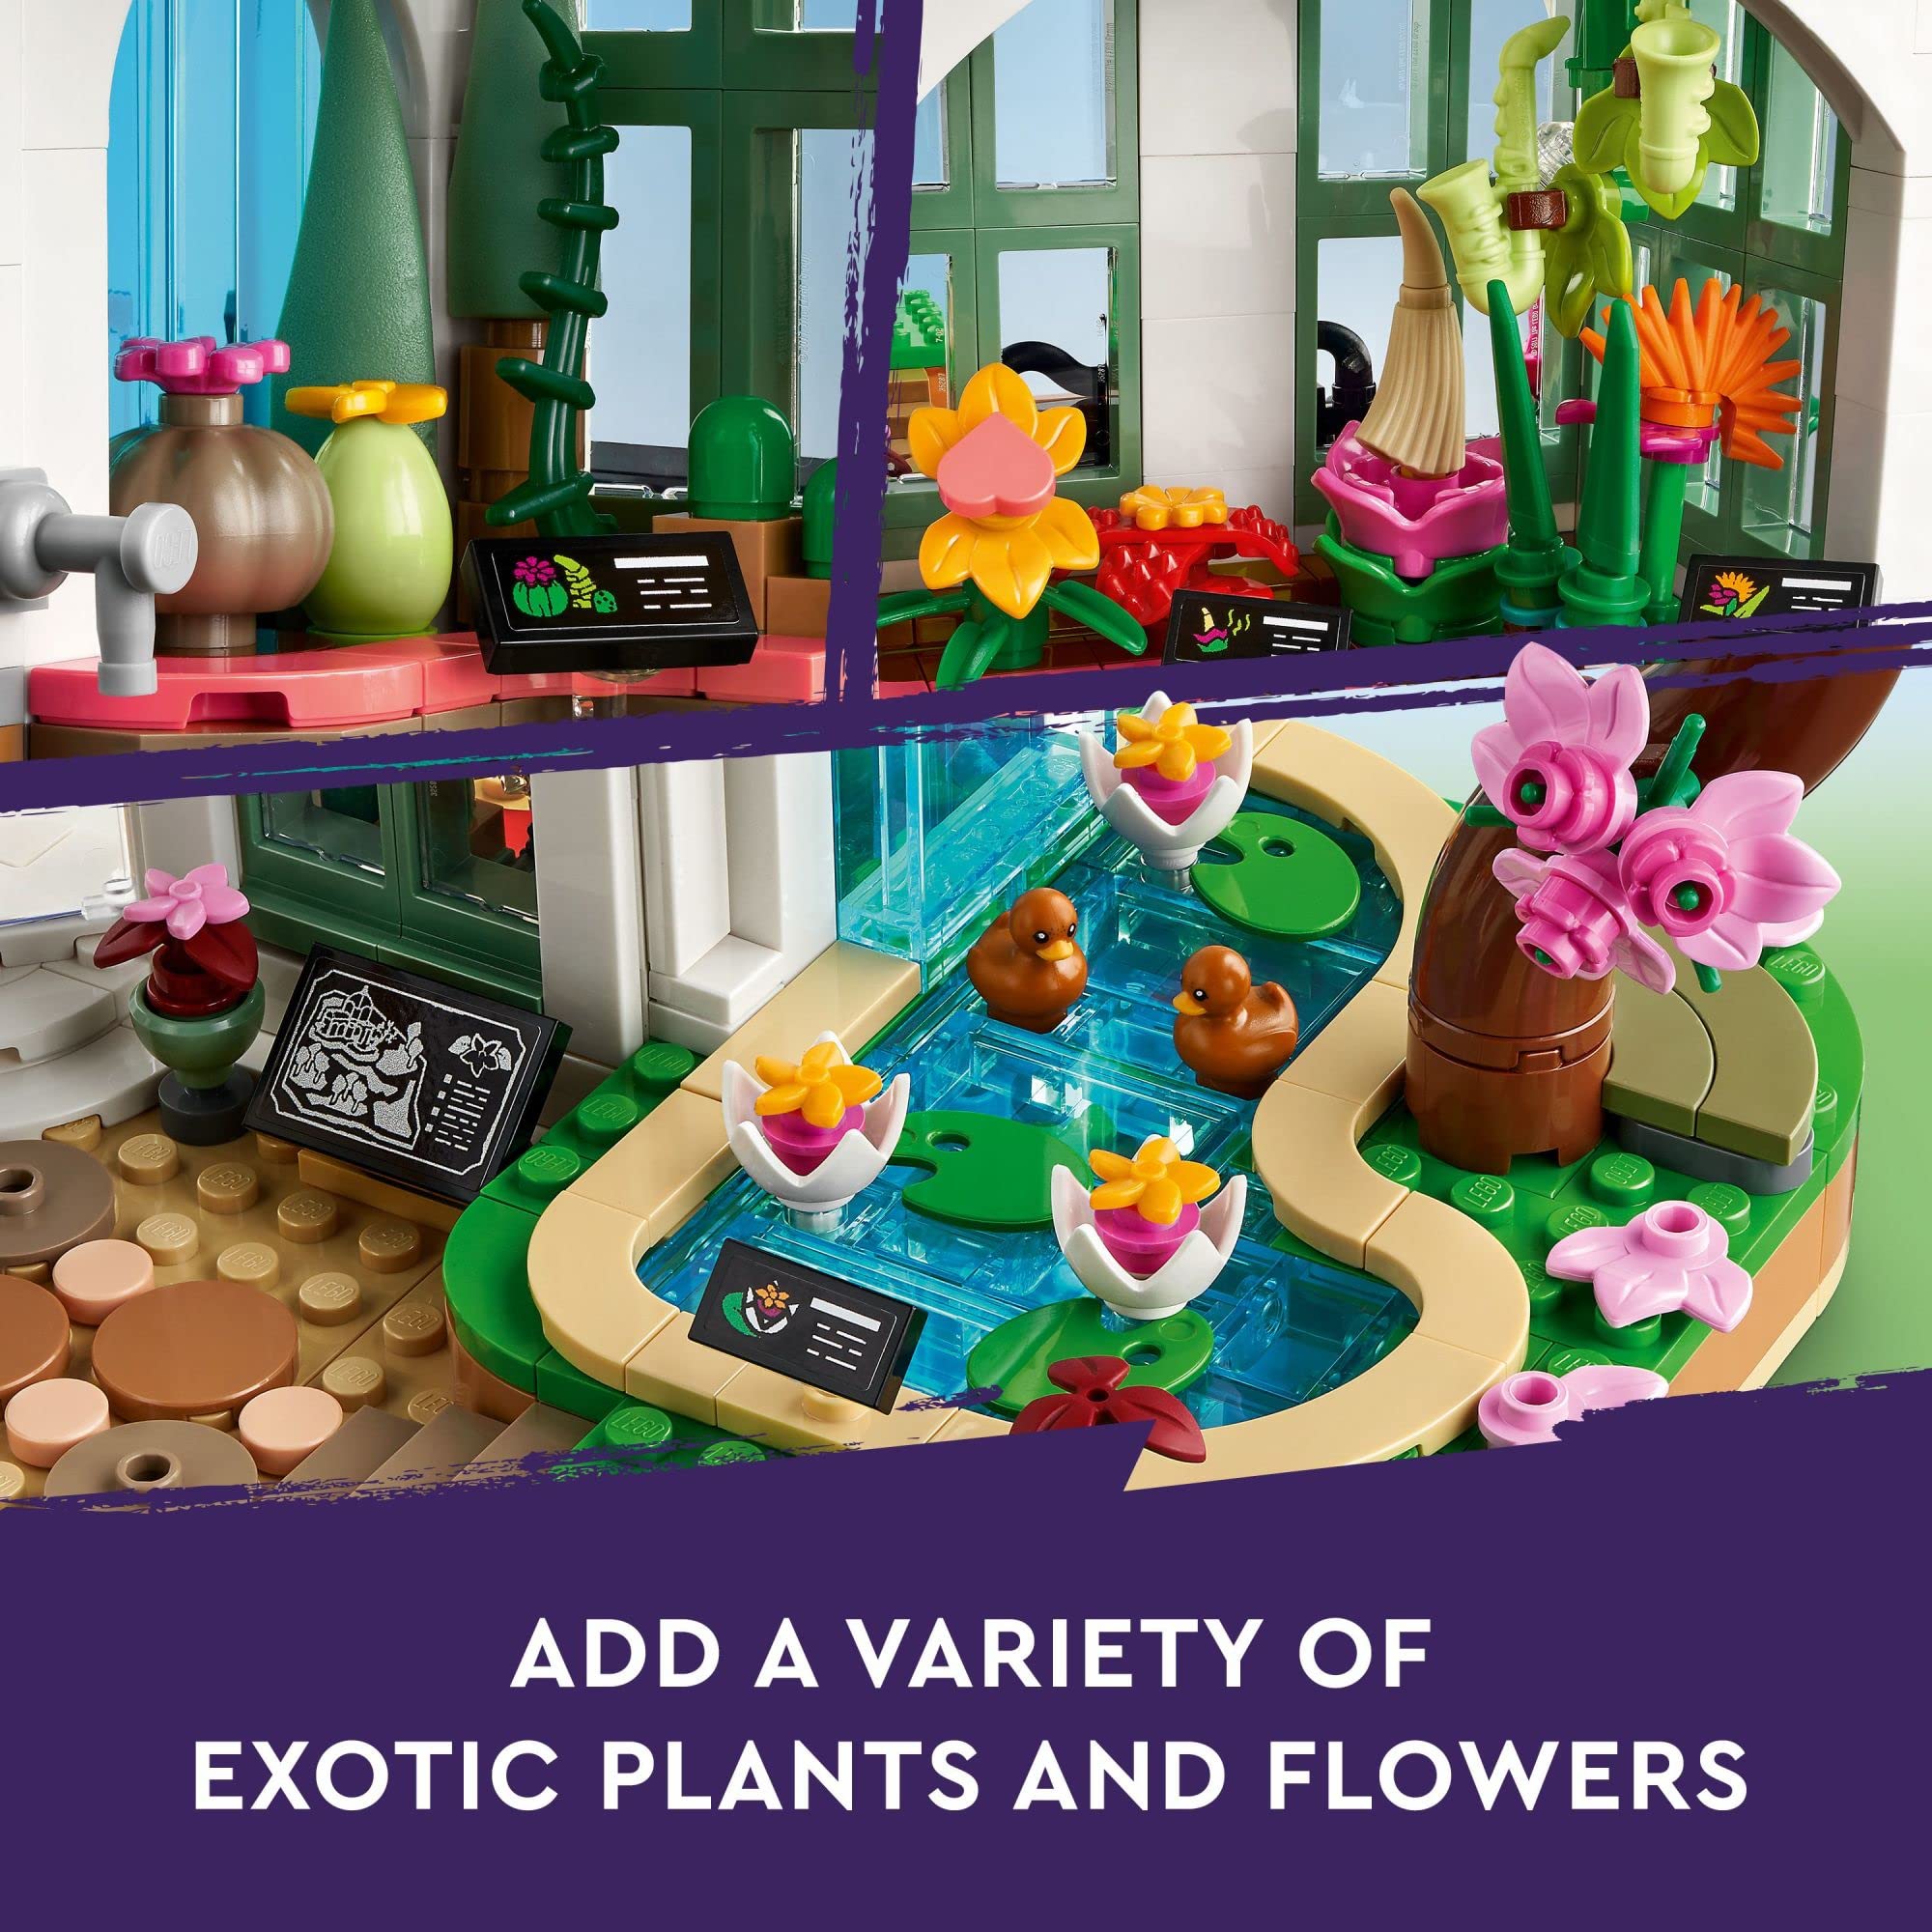 LEGO Friends Botanical Garden 41757 Building Toy Set, A Creative Project for Ages 12+, Build and Display a Detailed Greenhouse Scene, A Gift for Kids and Teens Who Love Flowers and Plants